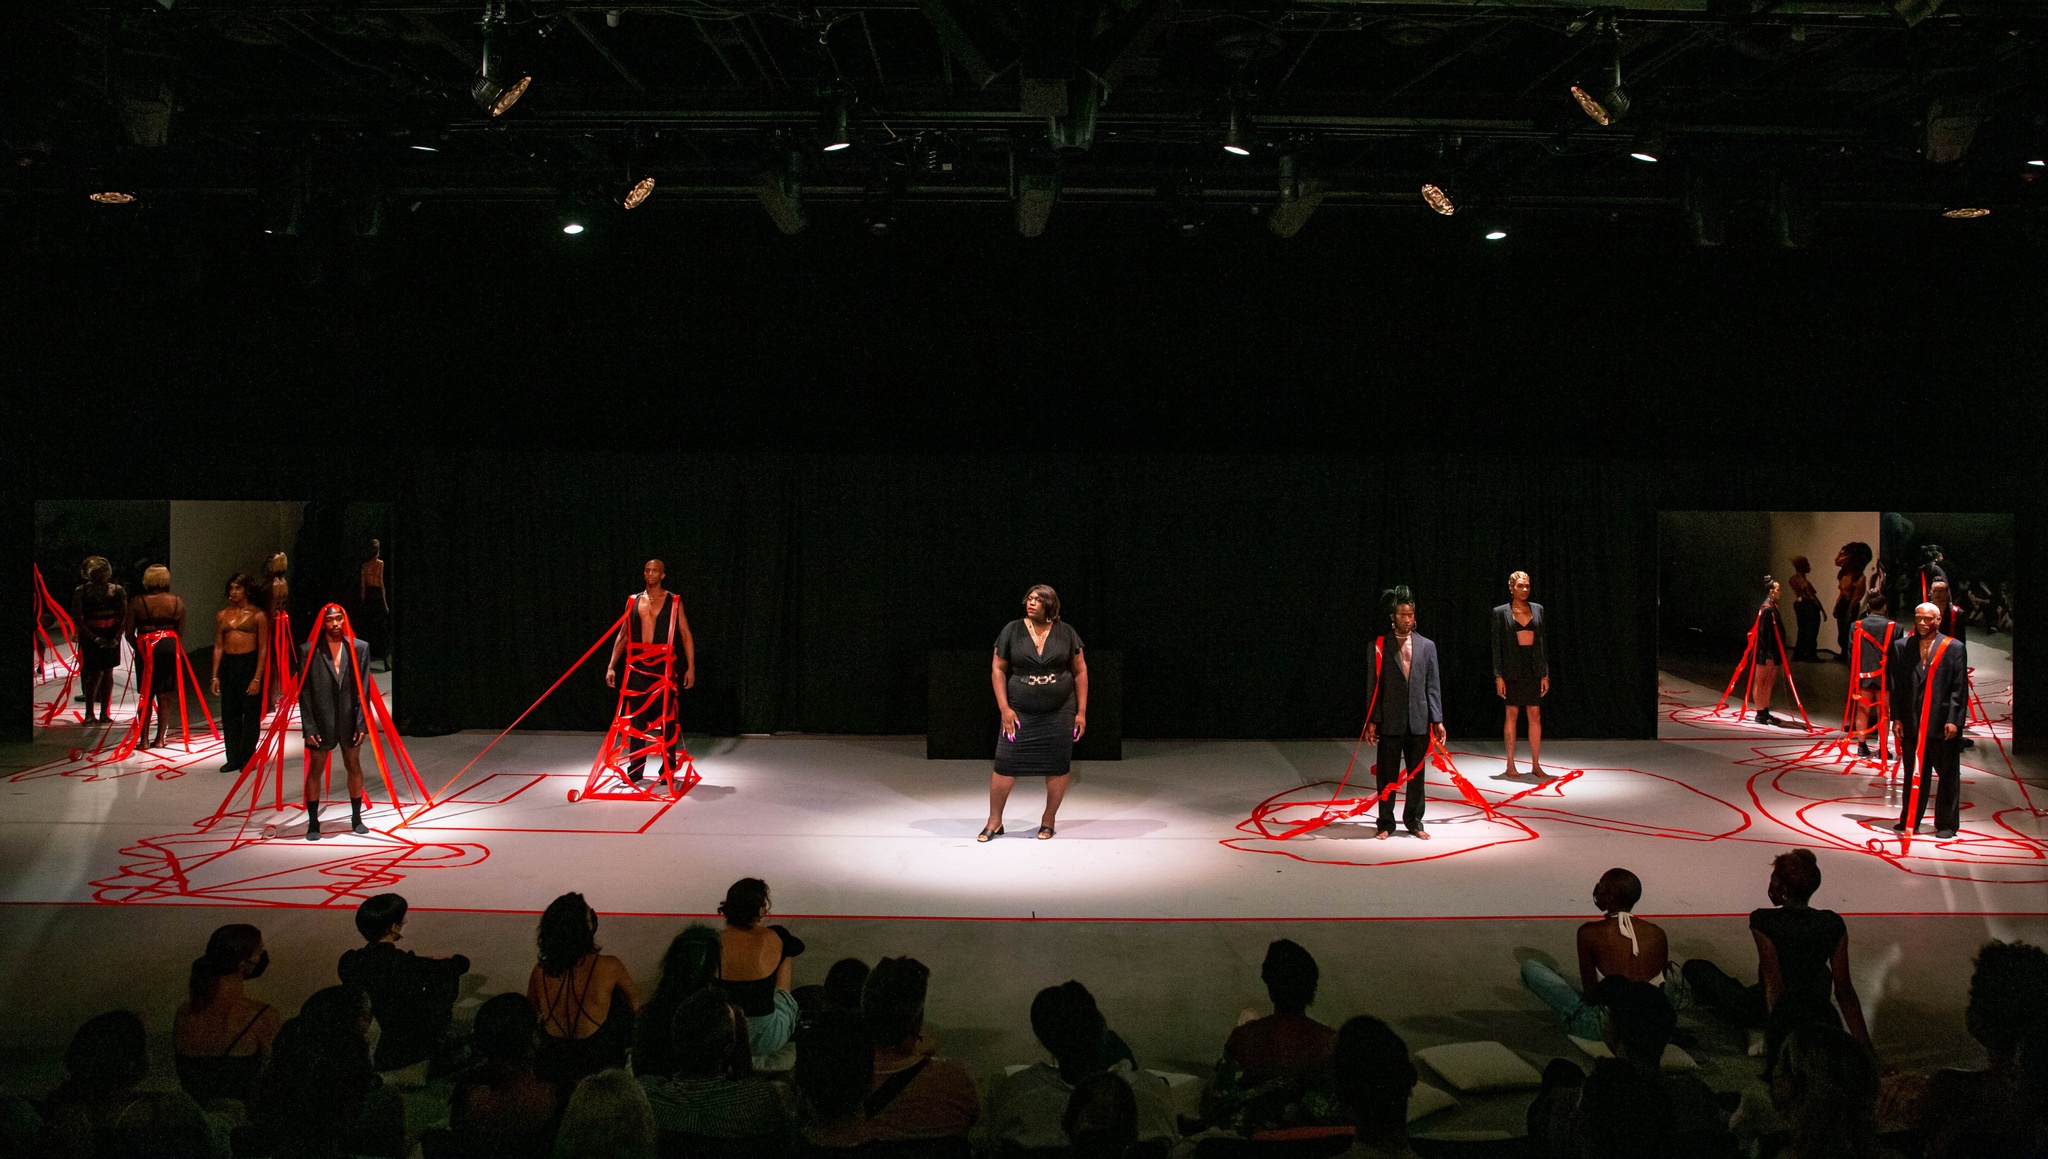 Nine Black trans performers stand on a stage wearing black suits and dresses in front of an audience. On the floor of the stage, two performers embrace as they roll together across the floor. Six of the standing performers have red tape reaching up from the ground to hold them in place.